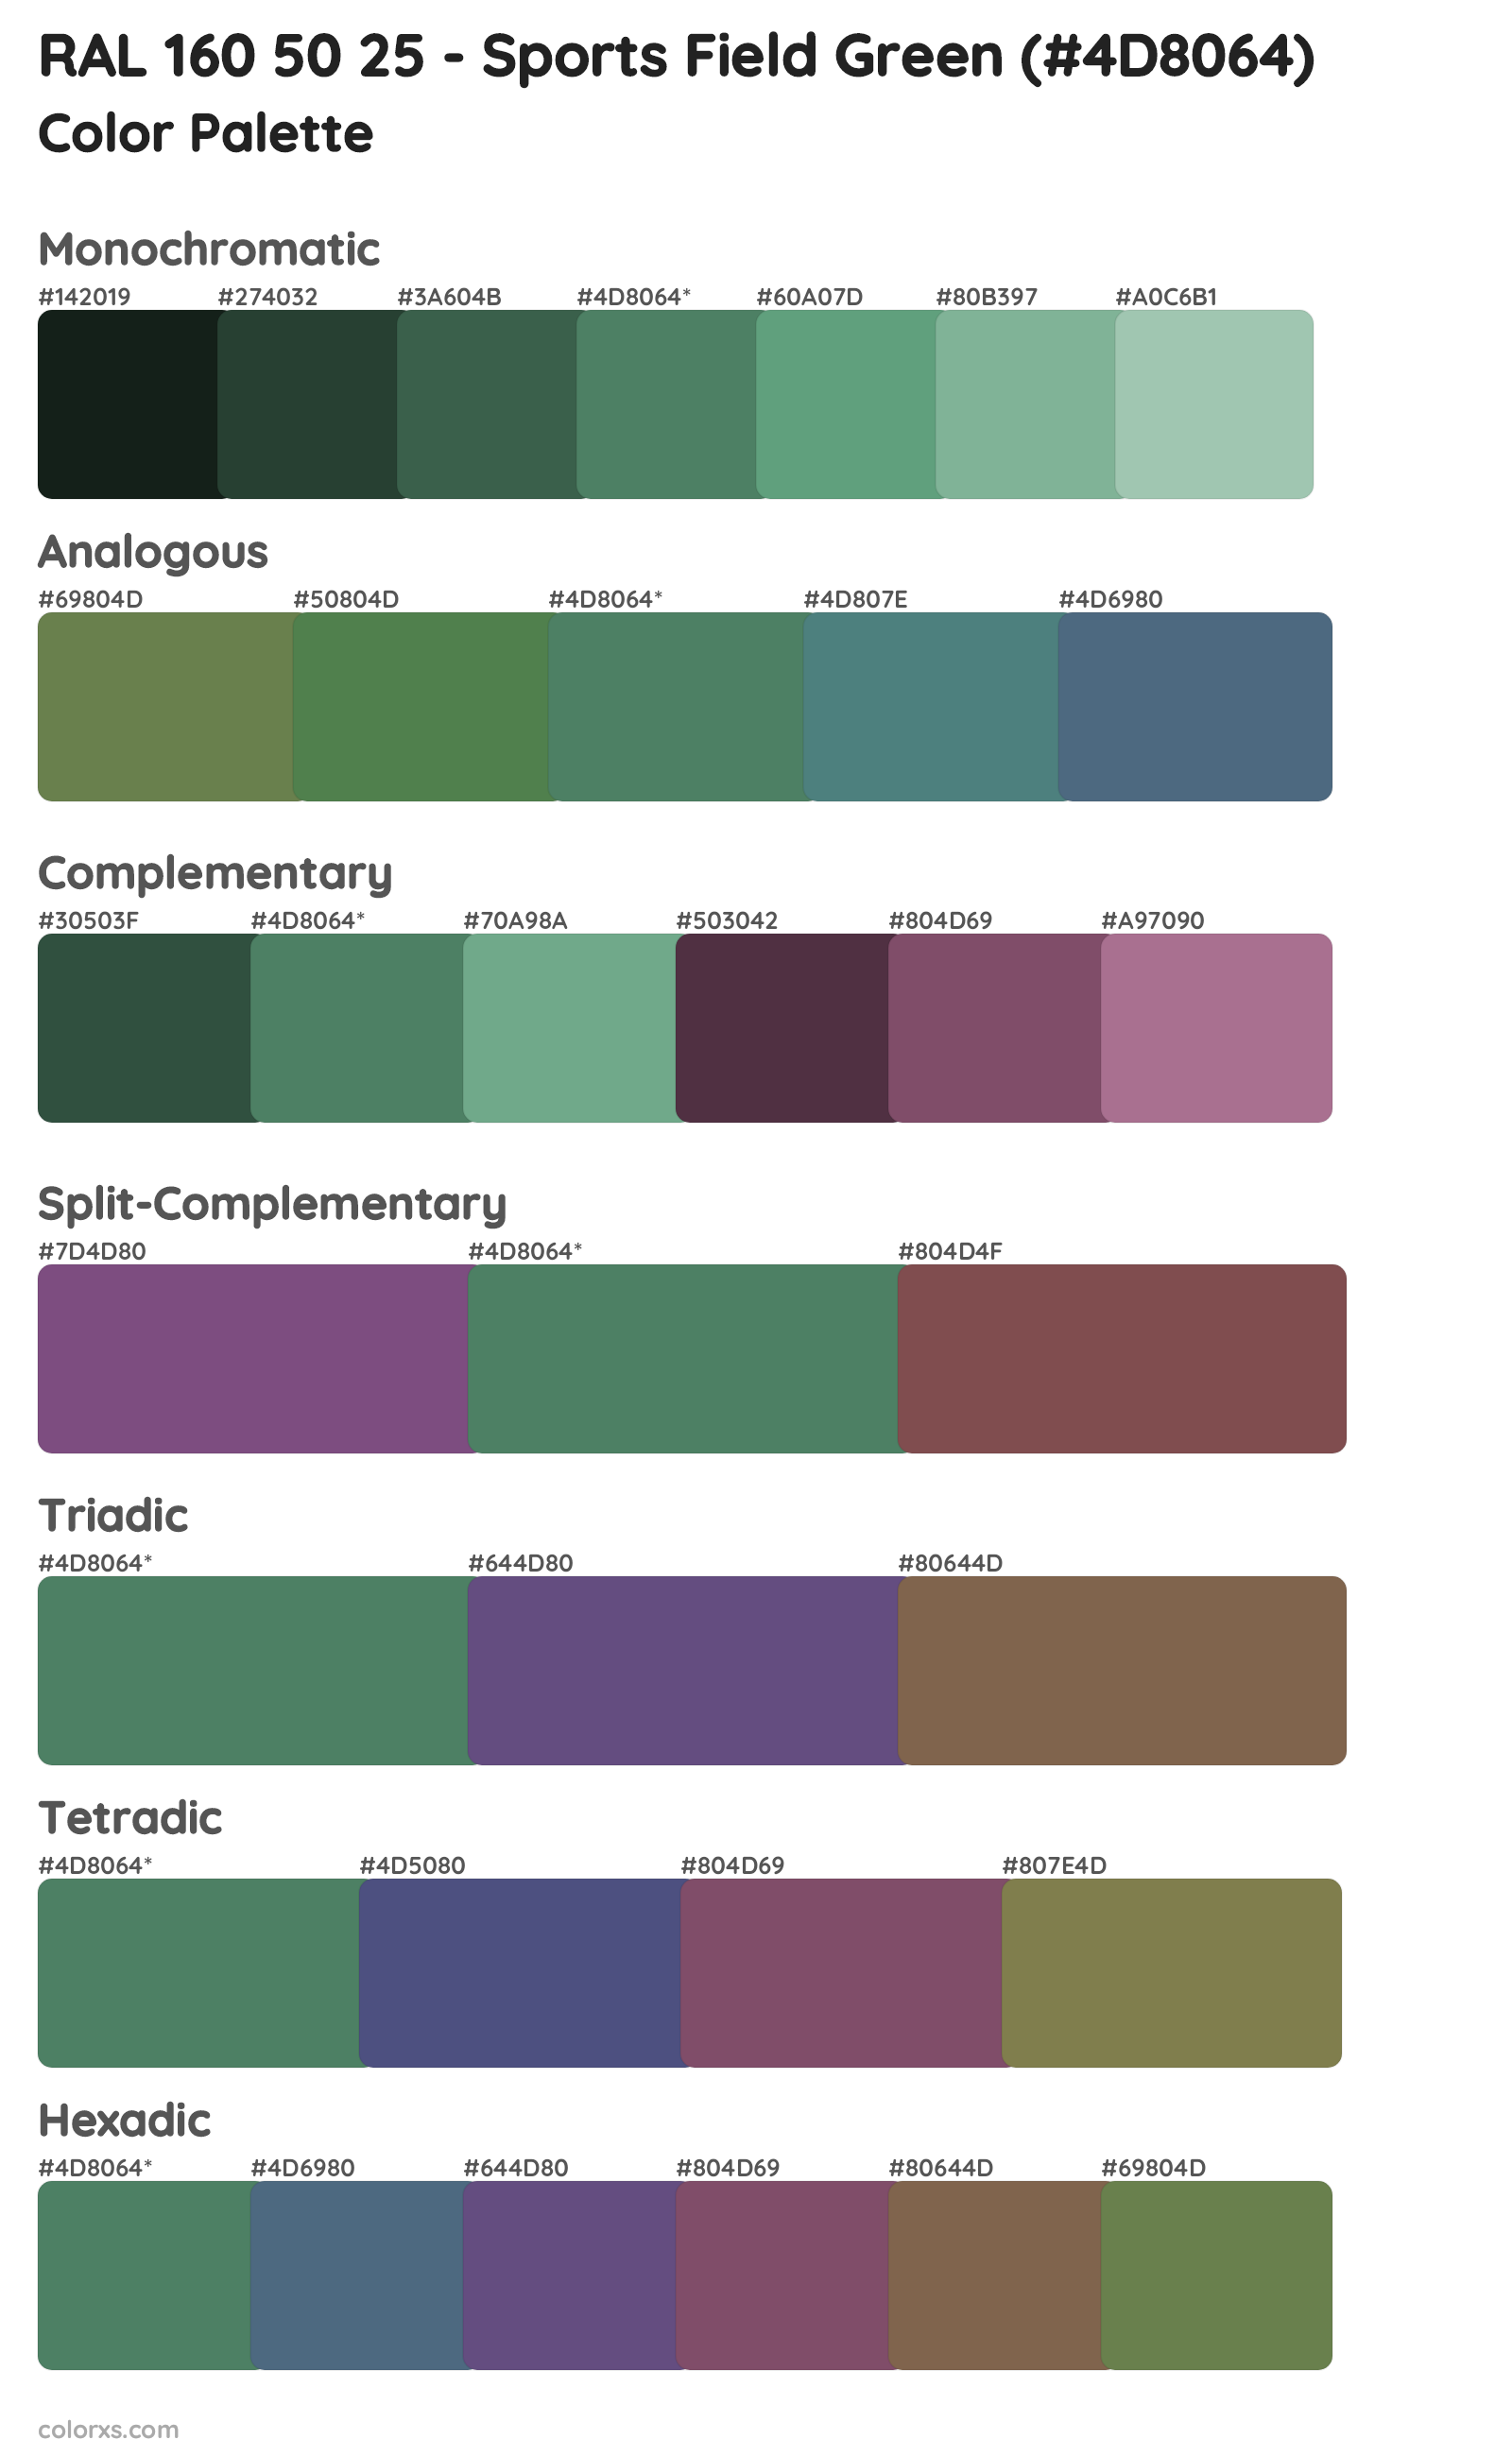 RAL 160 50 25 - Sports Field Green Color Scheme Palettes